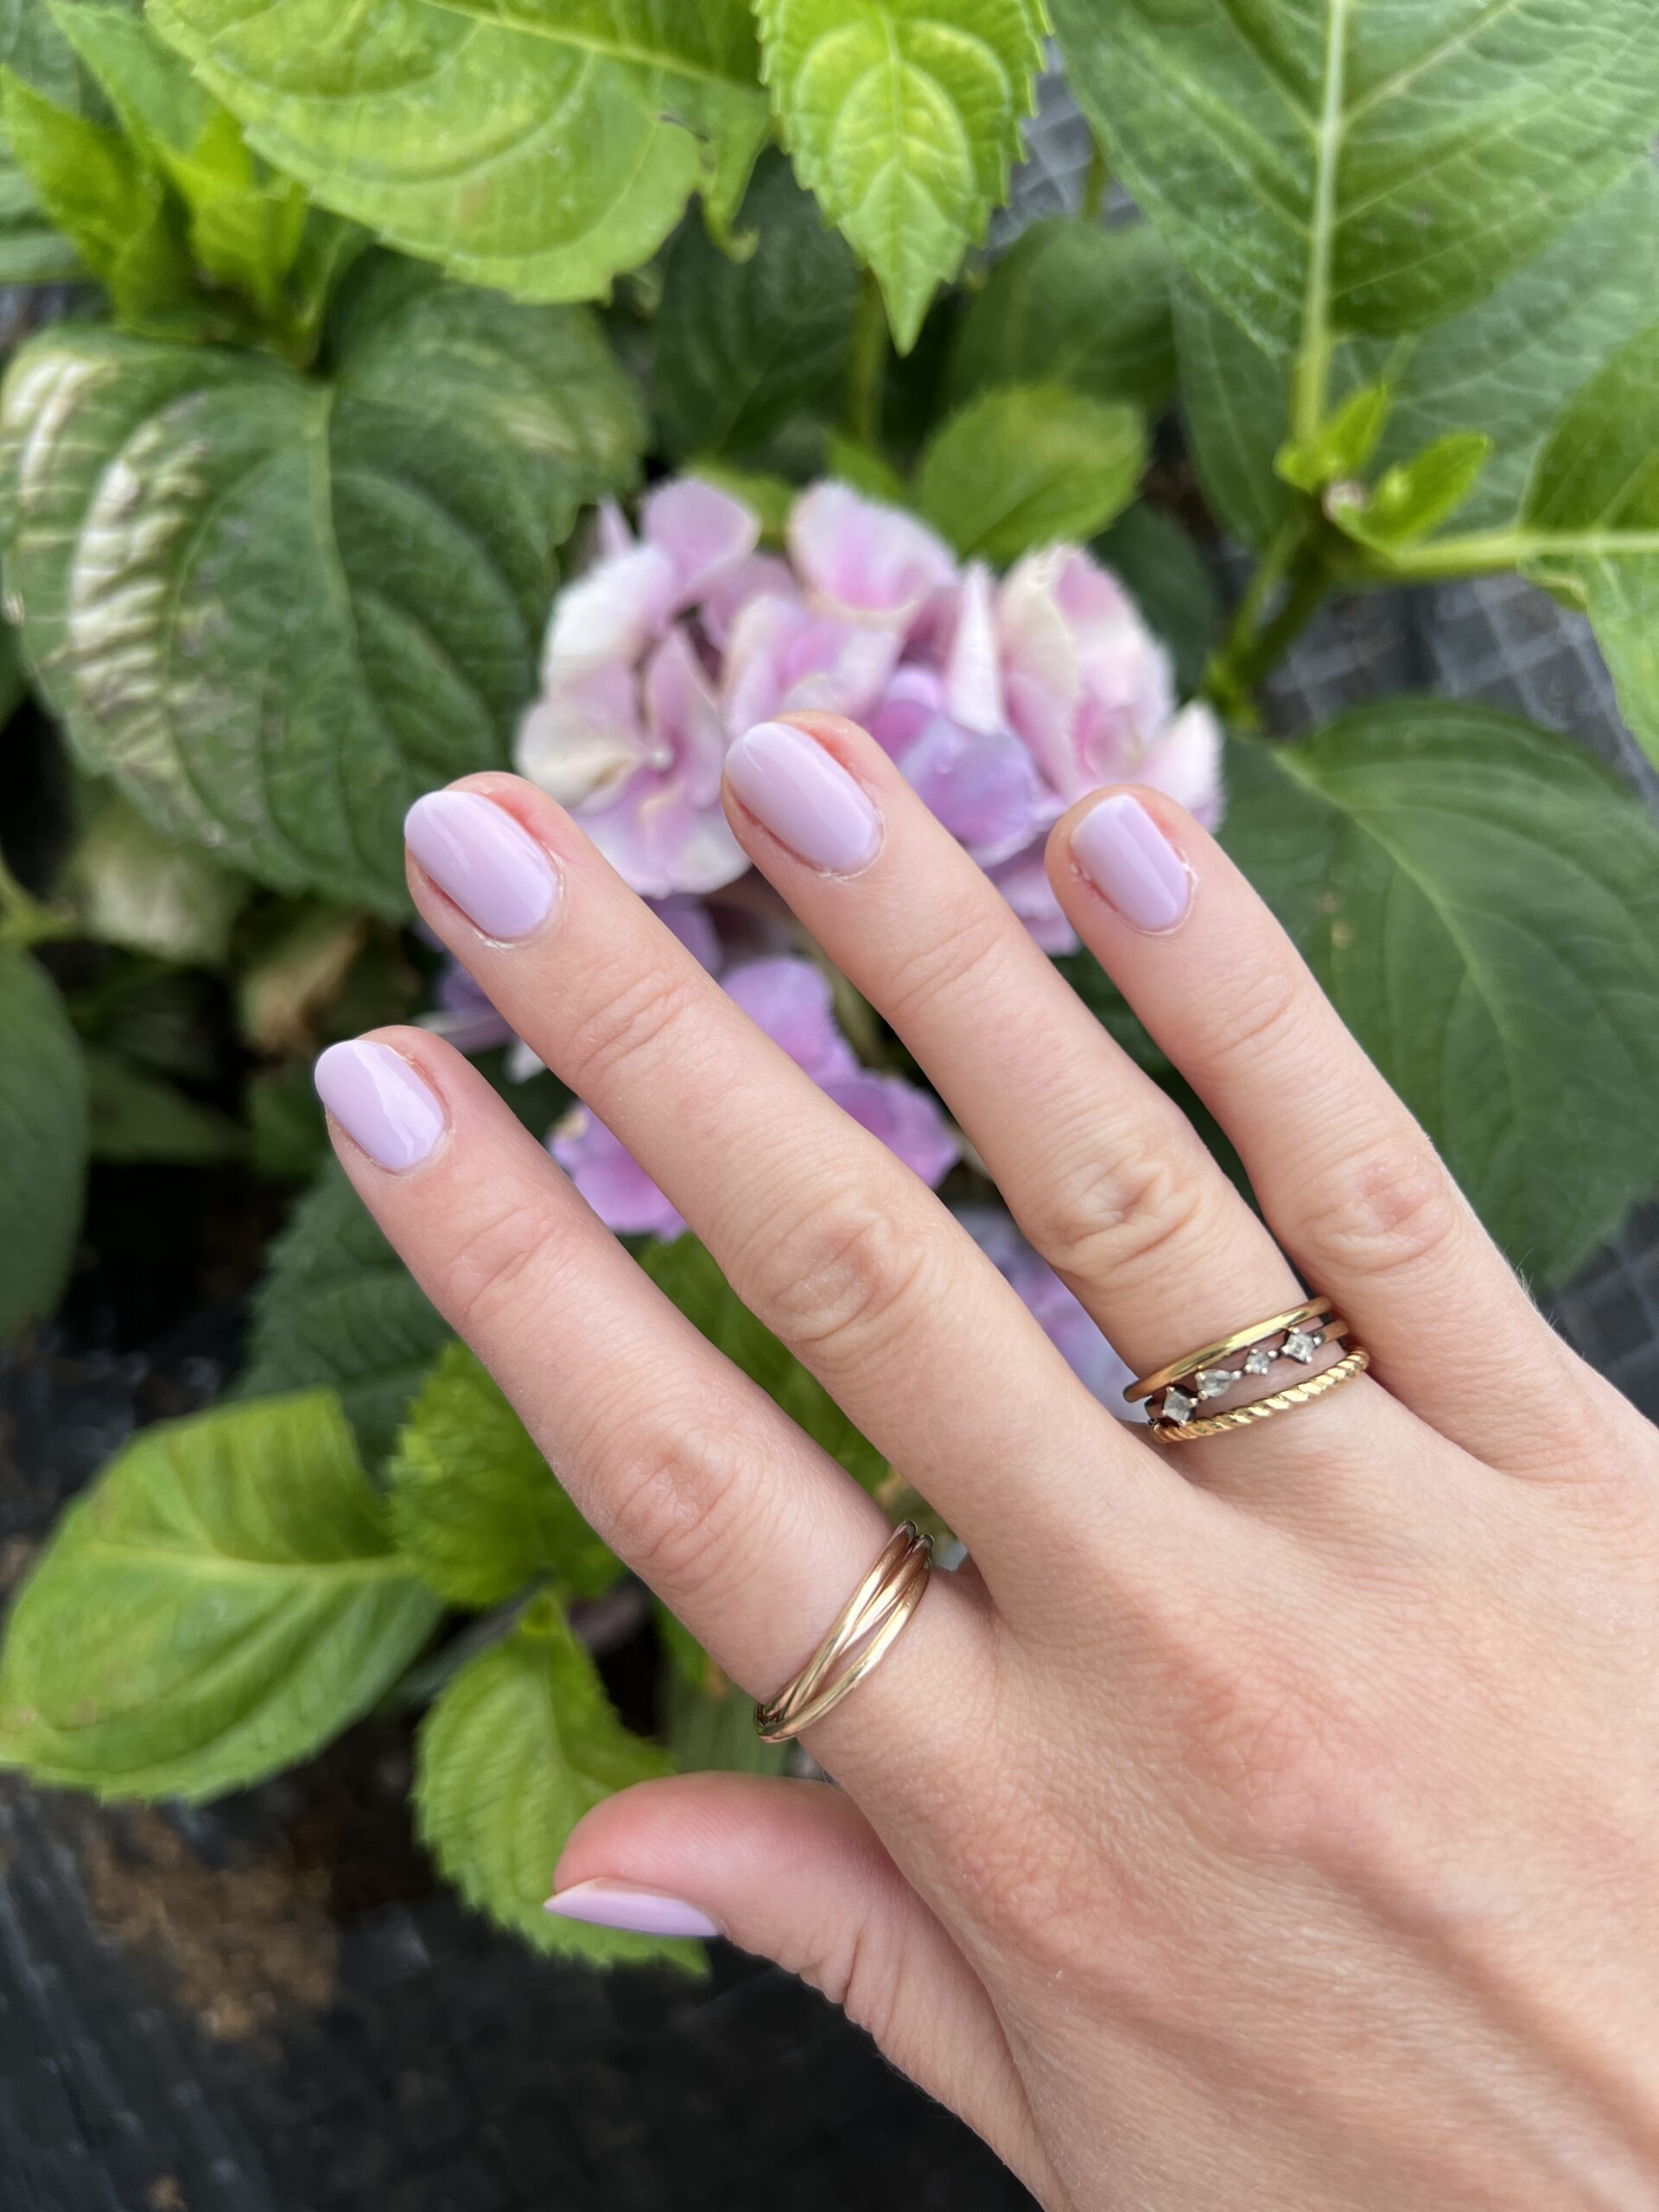 A woman's hand with gold rings and lavender nail polish is stretched out over purple flowers.